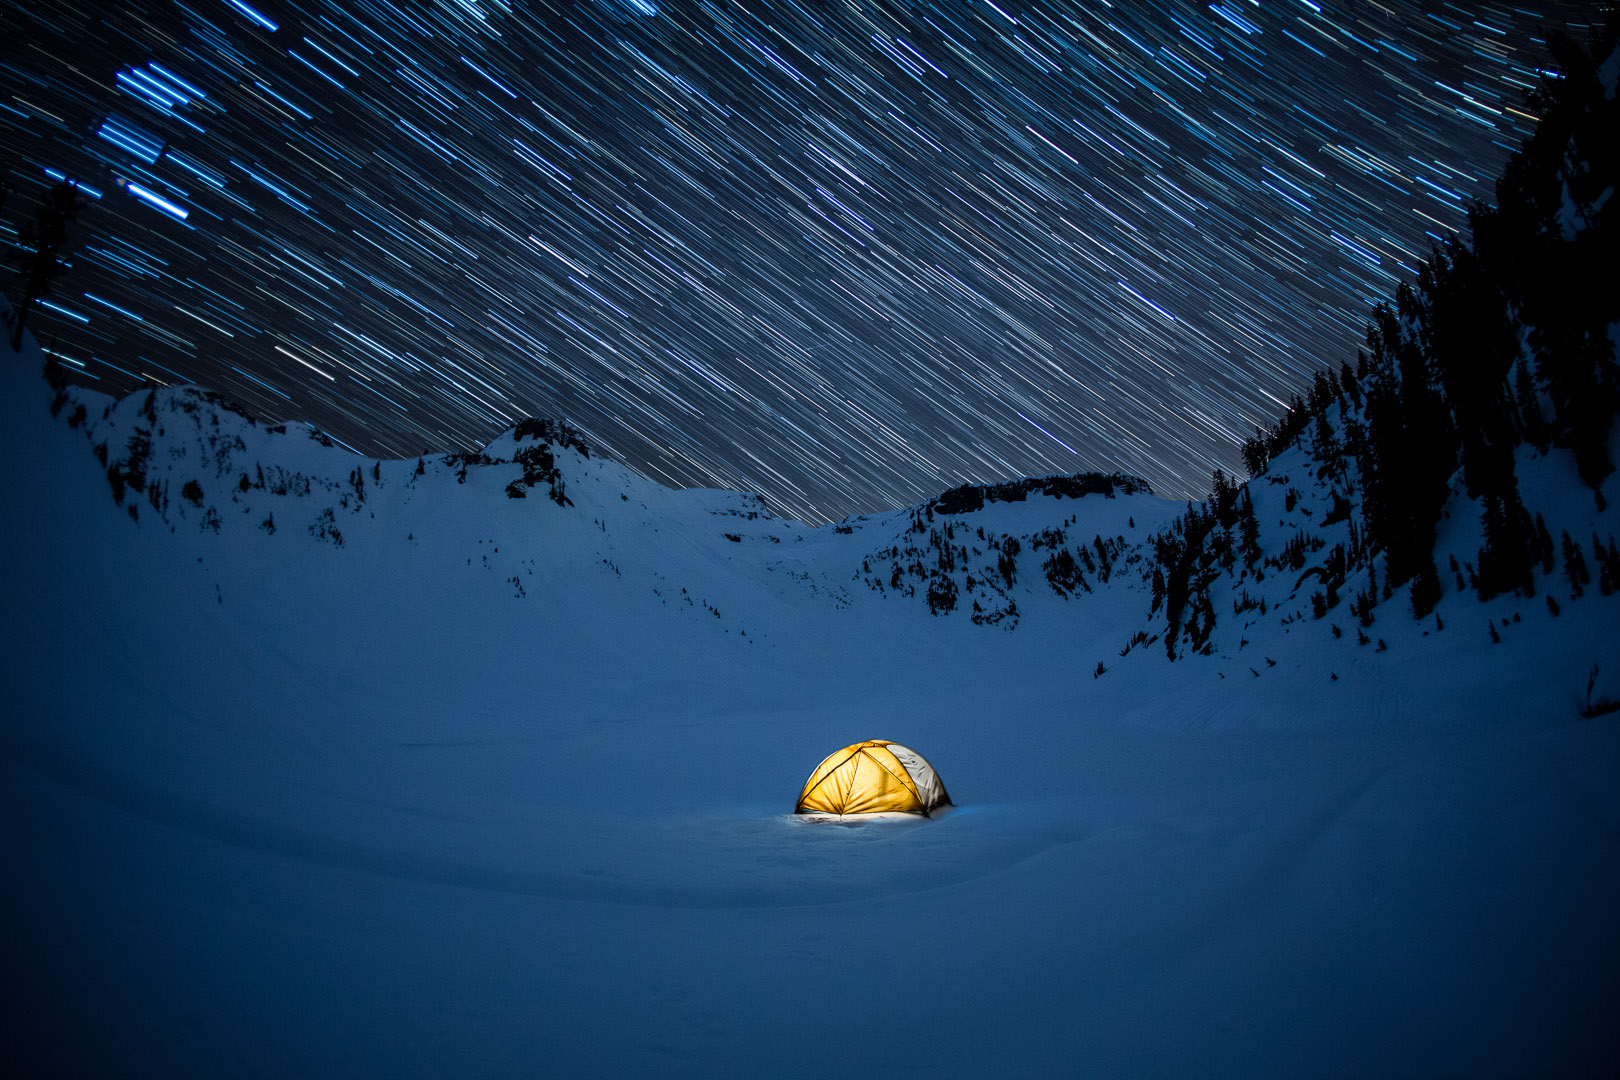 Outdoor Backcountry Camping